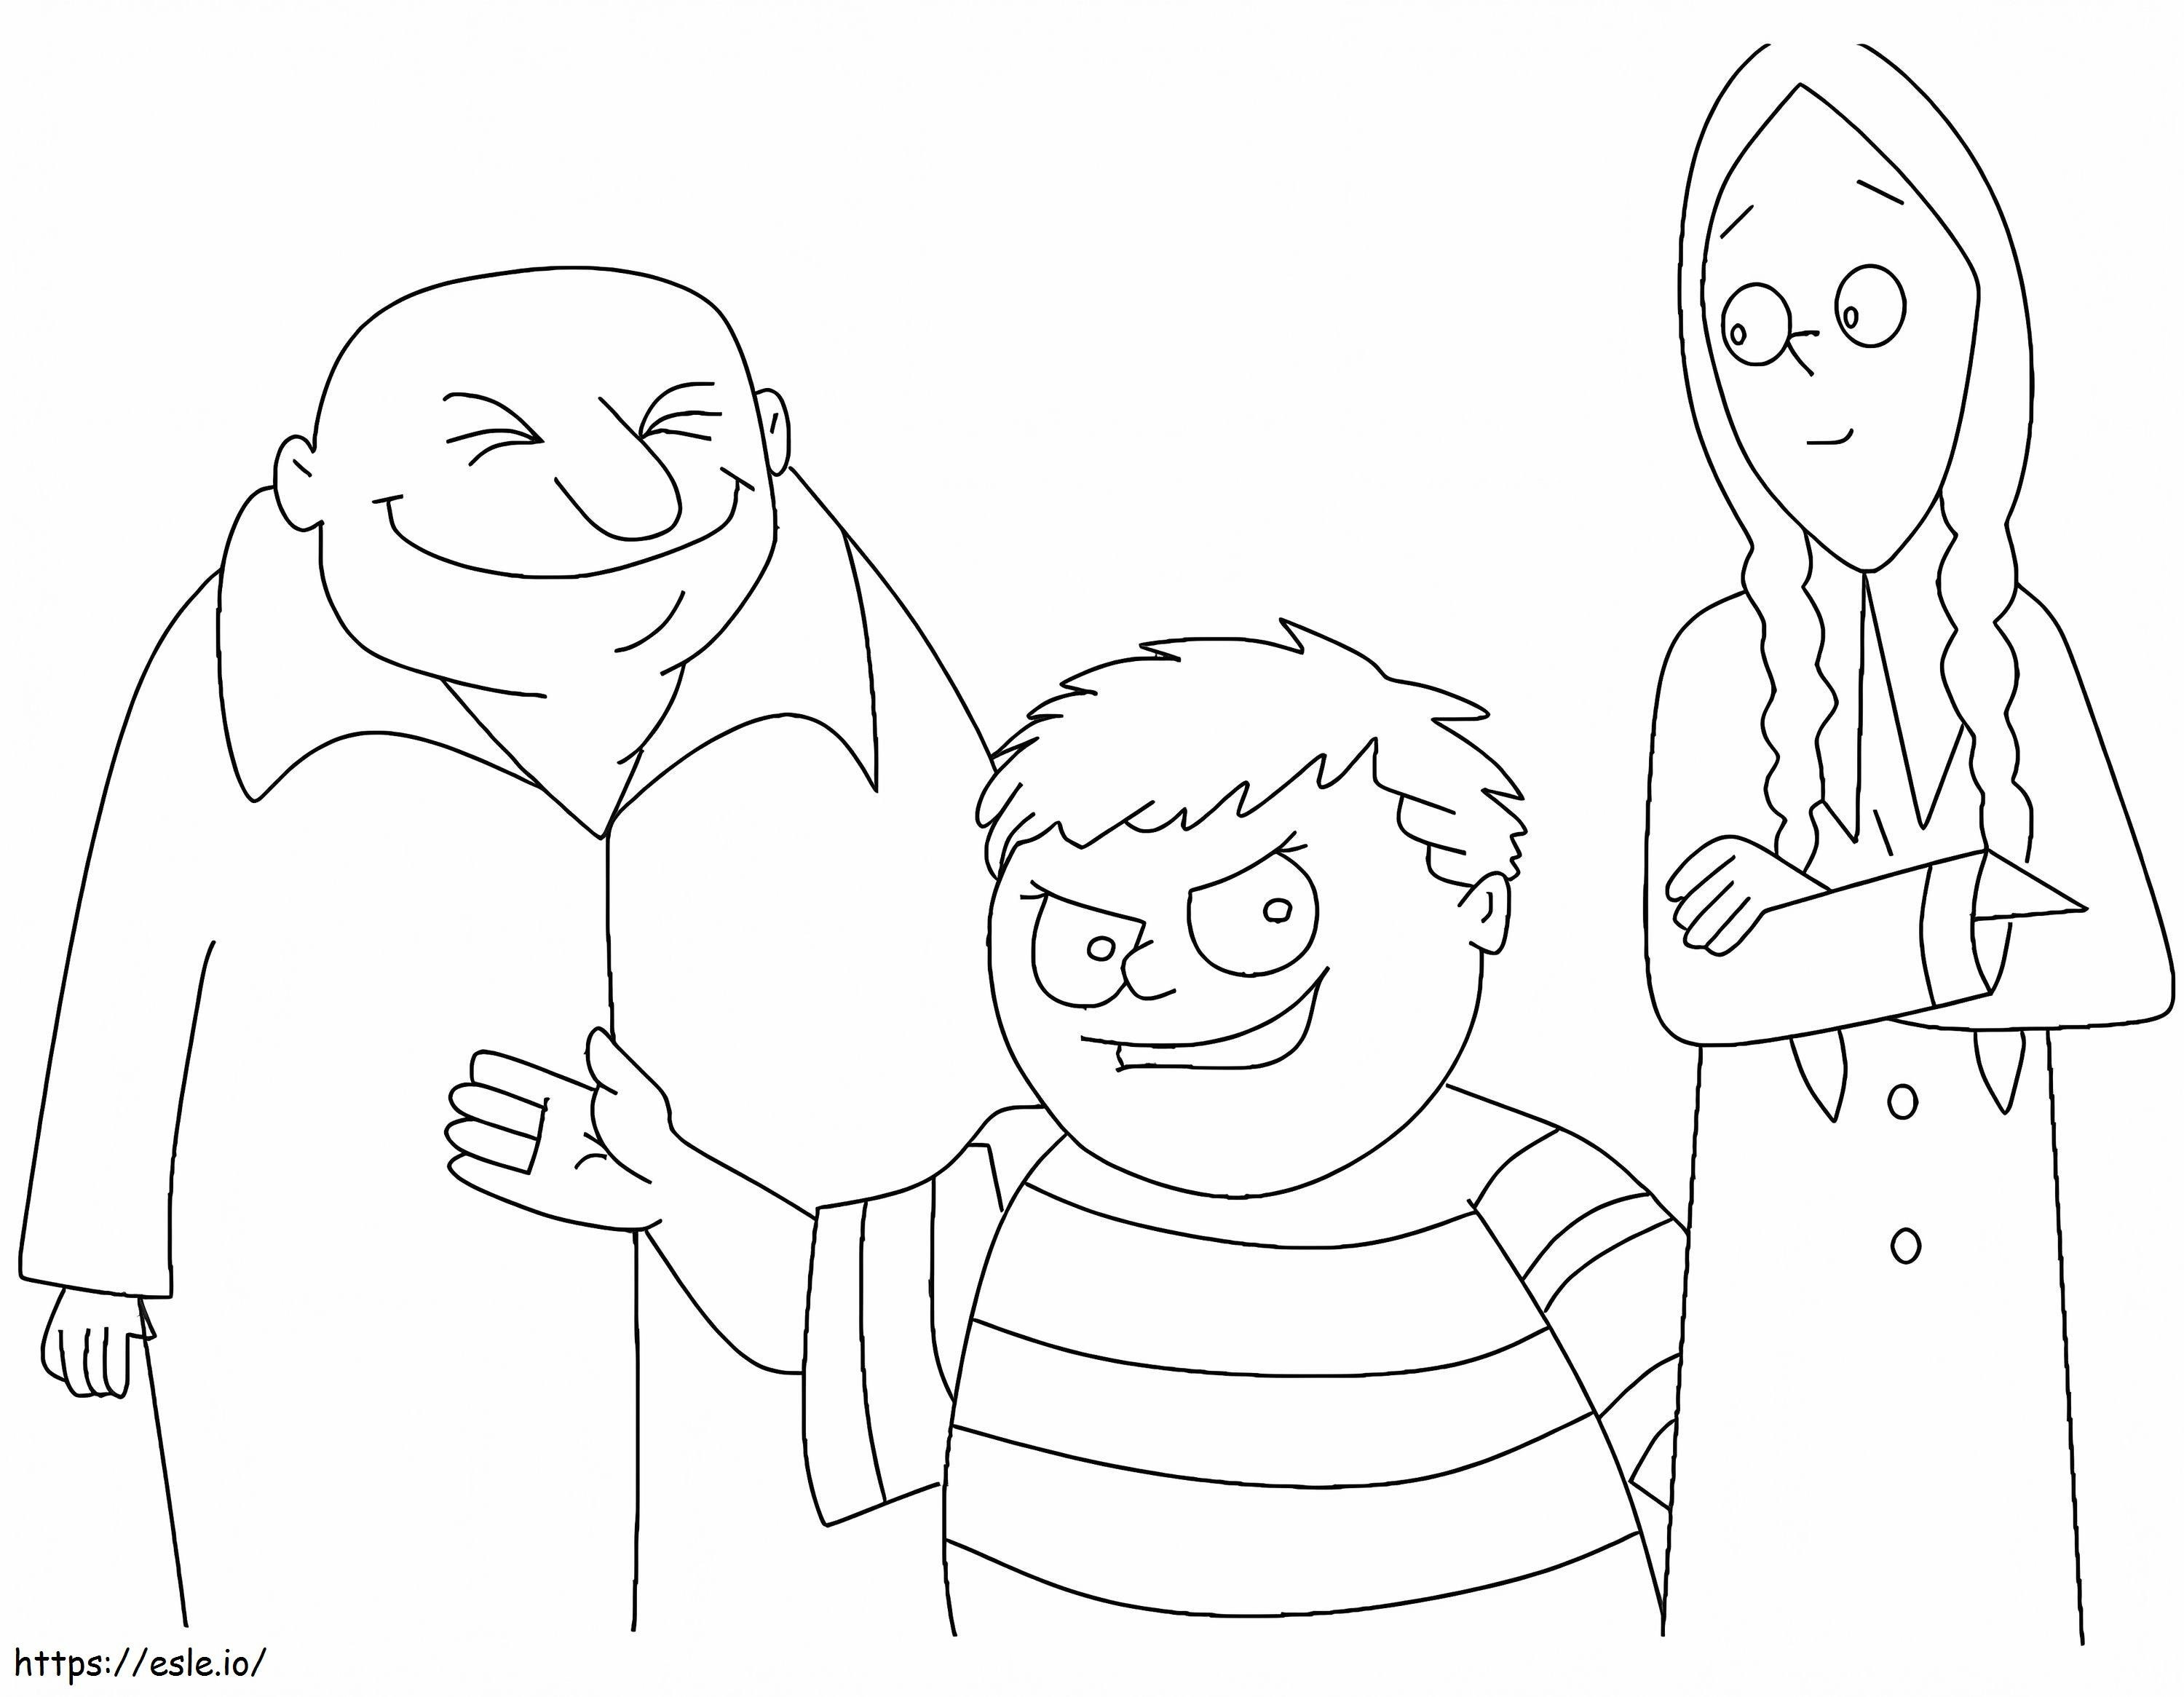 The Addams Family 3 coloring page